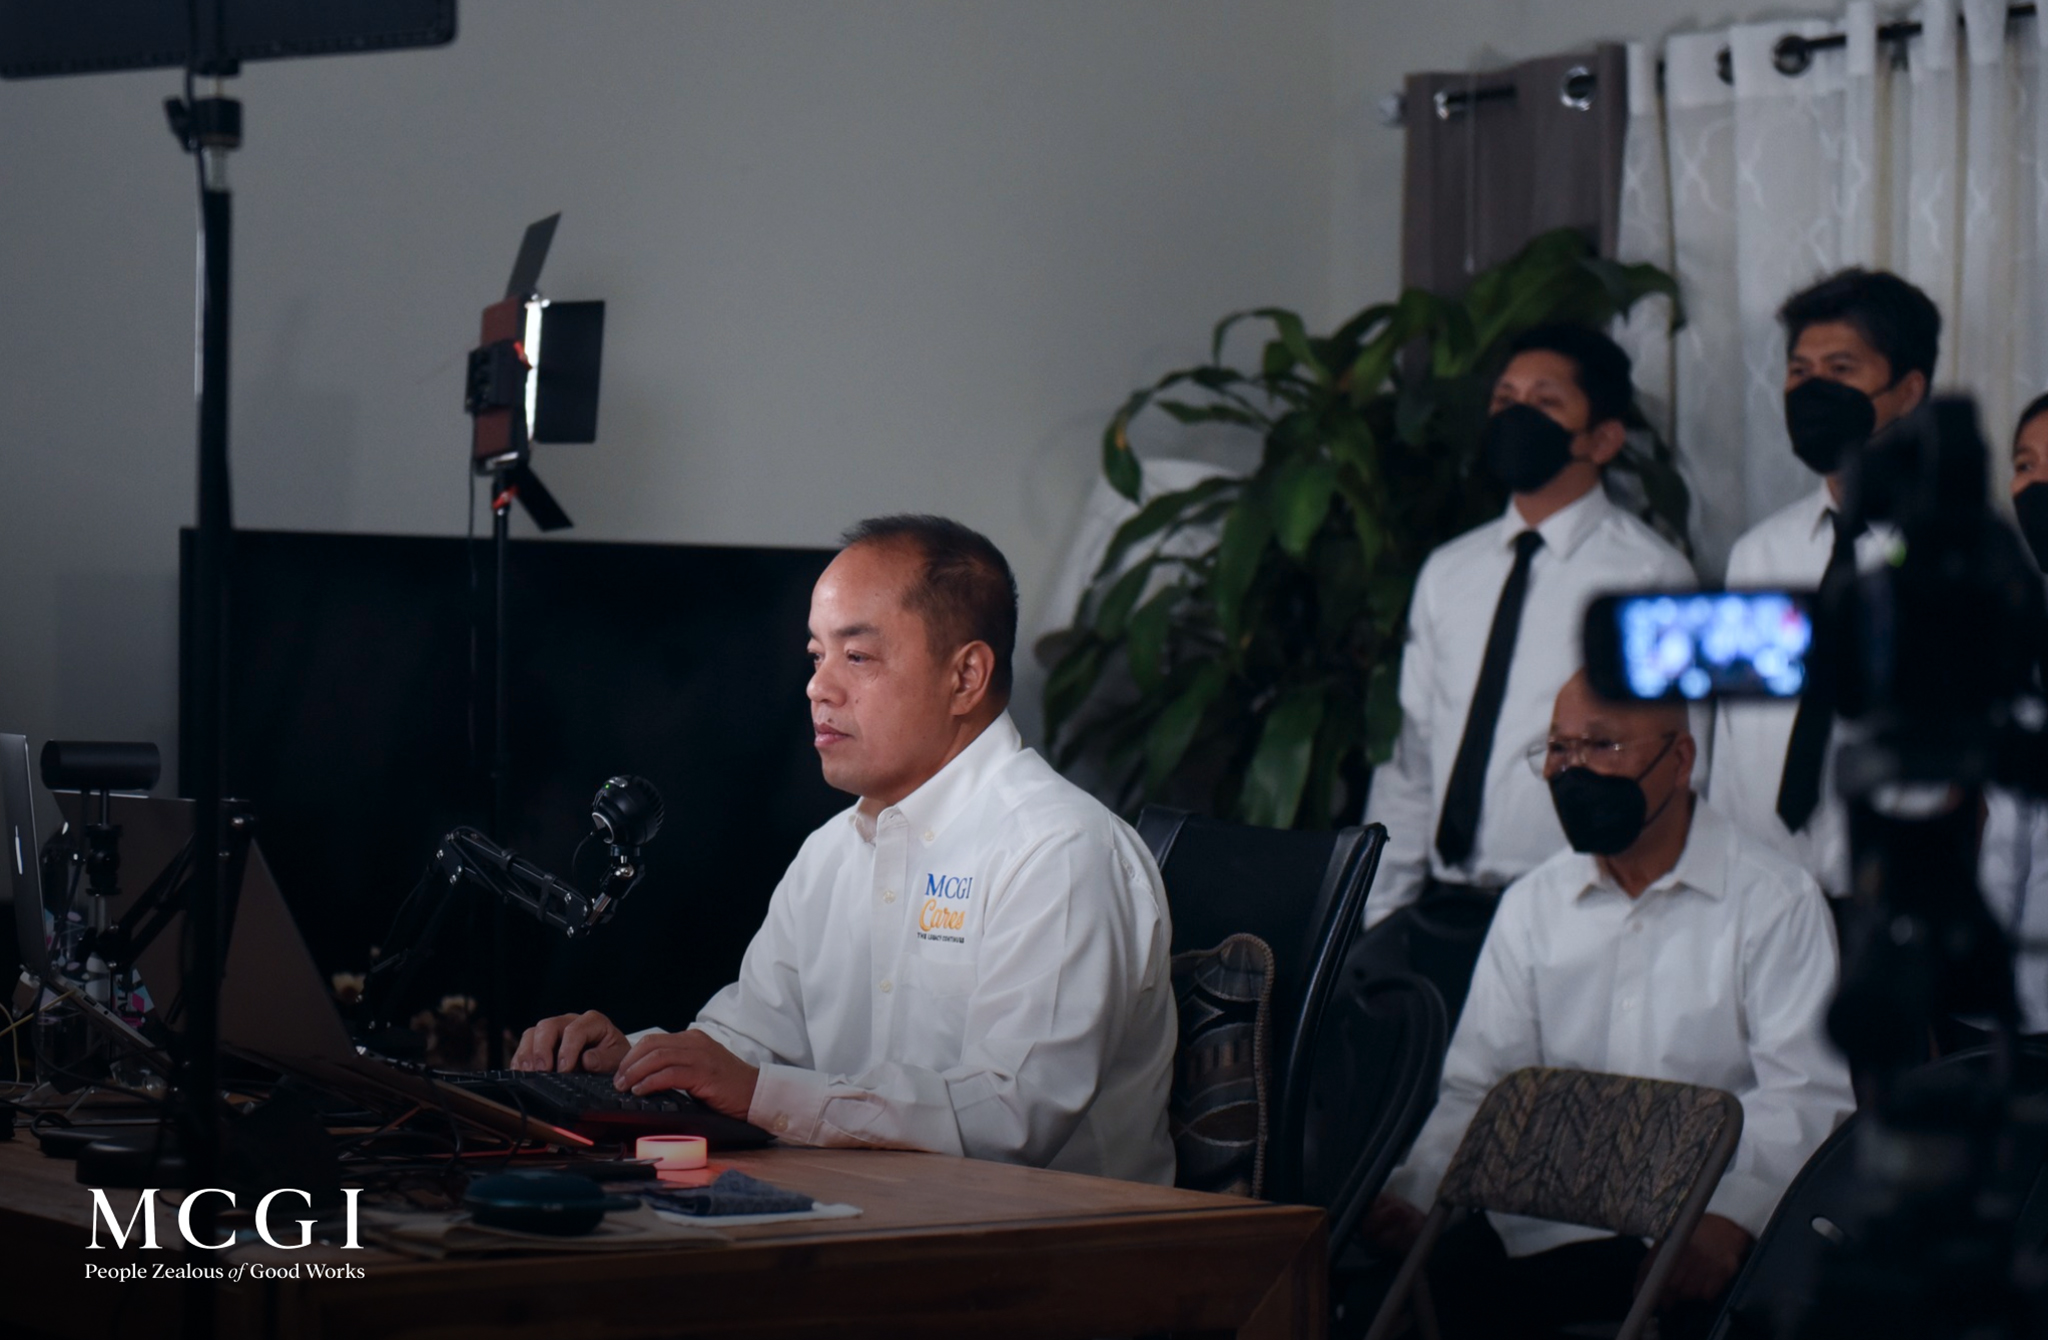 The image shows Brother Josel Mallari, an MCGI Helper of the Ministry, behind His laptop while attending an MCGI gathering.